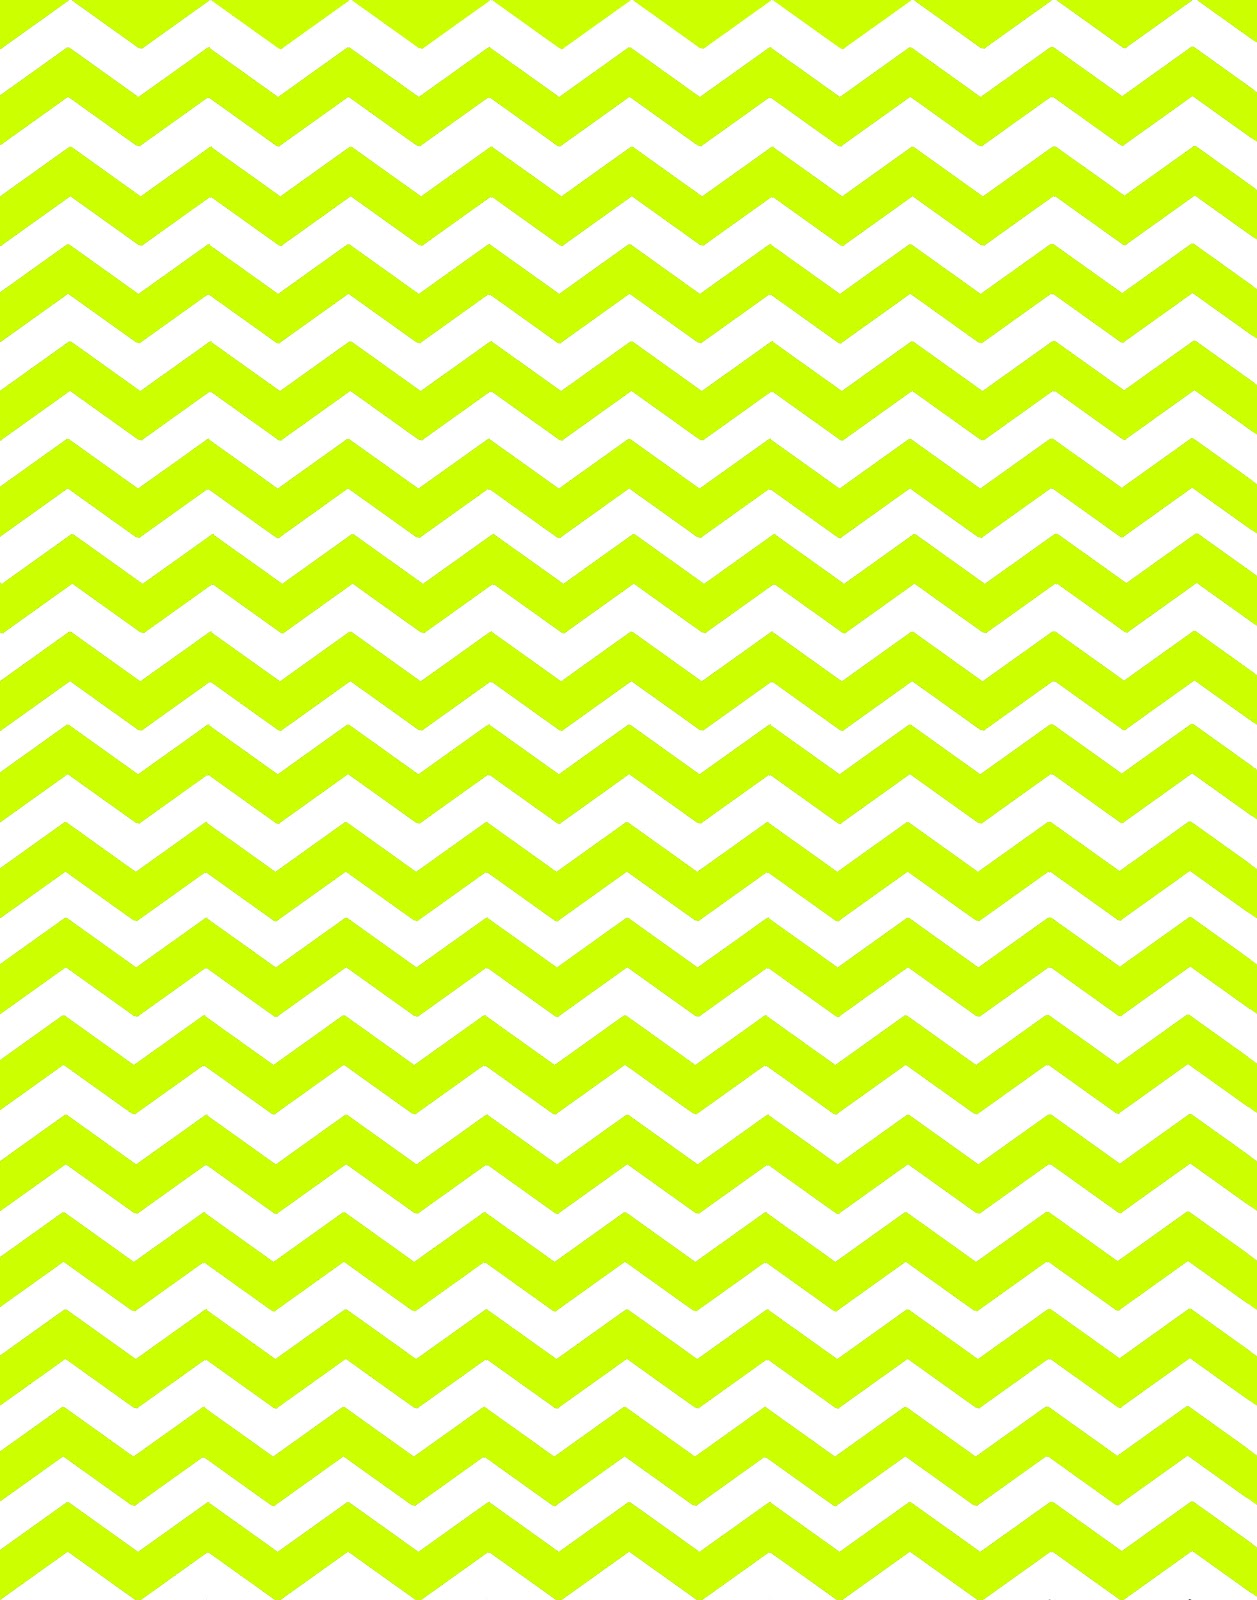 19 Free Chevron Patterns Free Cliparts That You Can Download To You